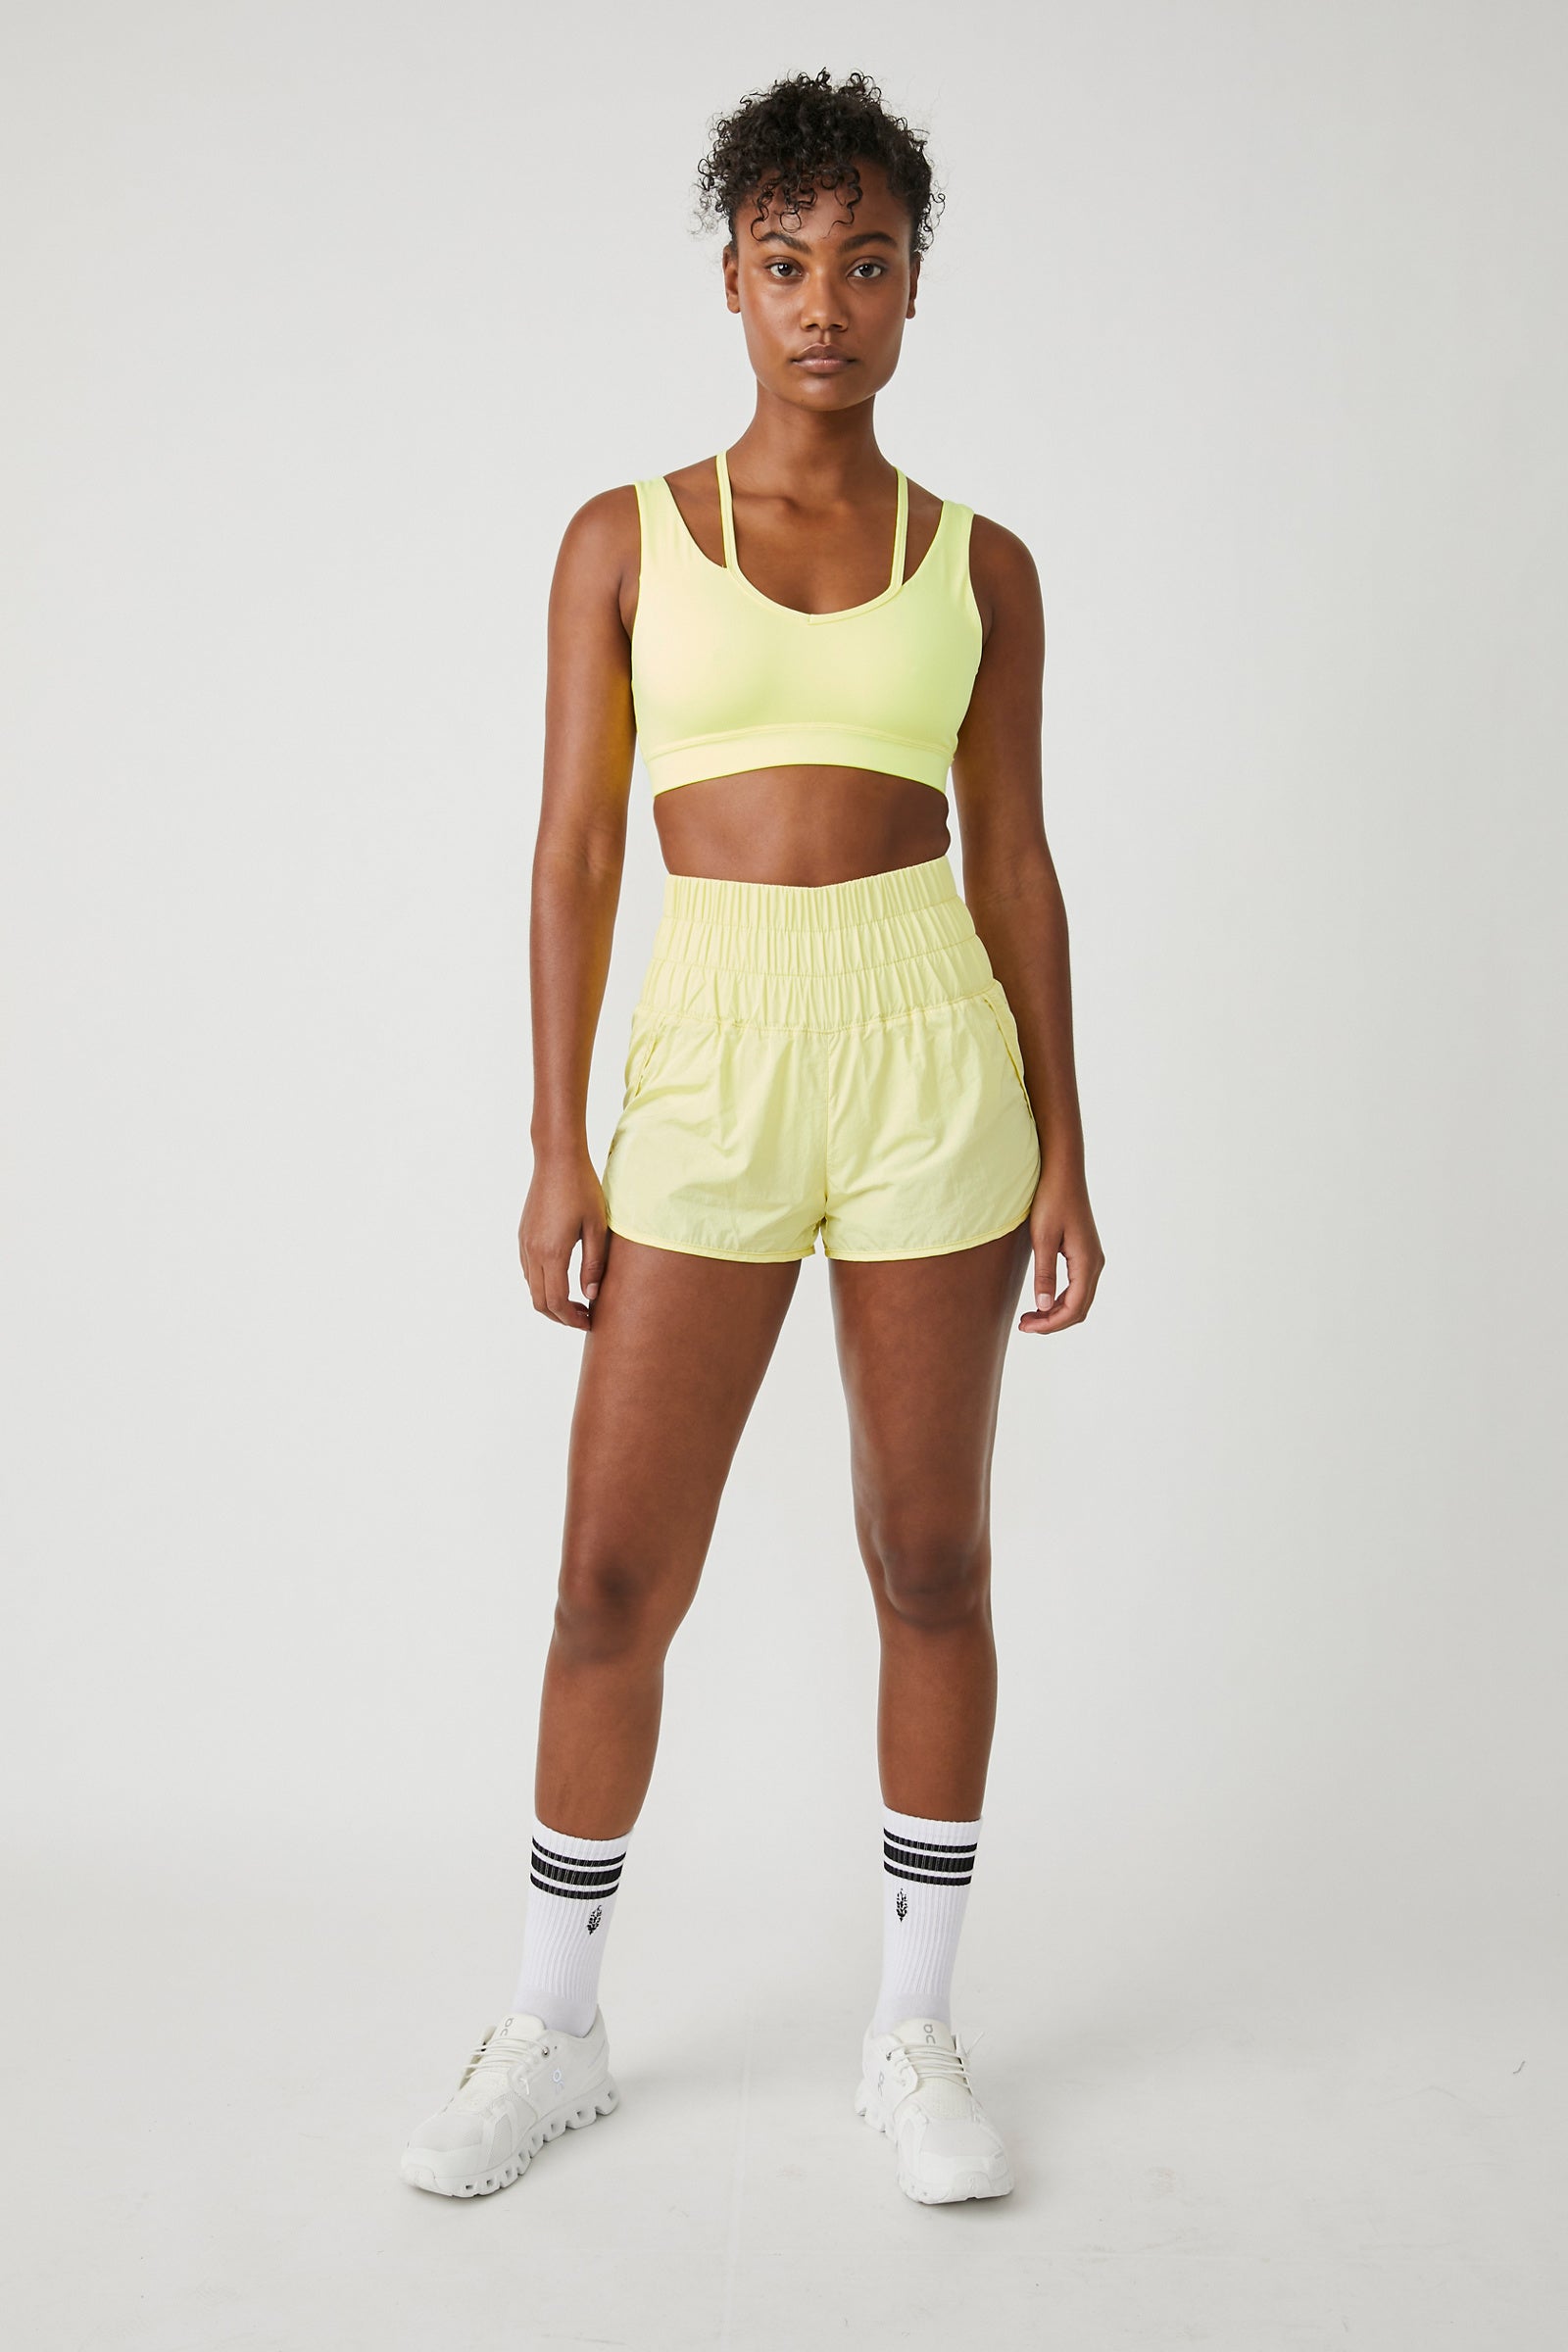 FP Movement Invigorate Colorblock Shorts by at Free People, Lime Combo, XS  - ShopStyle